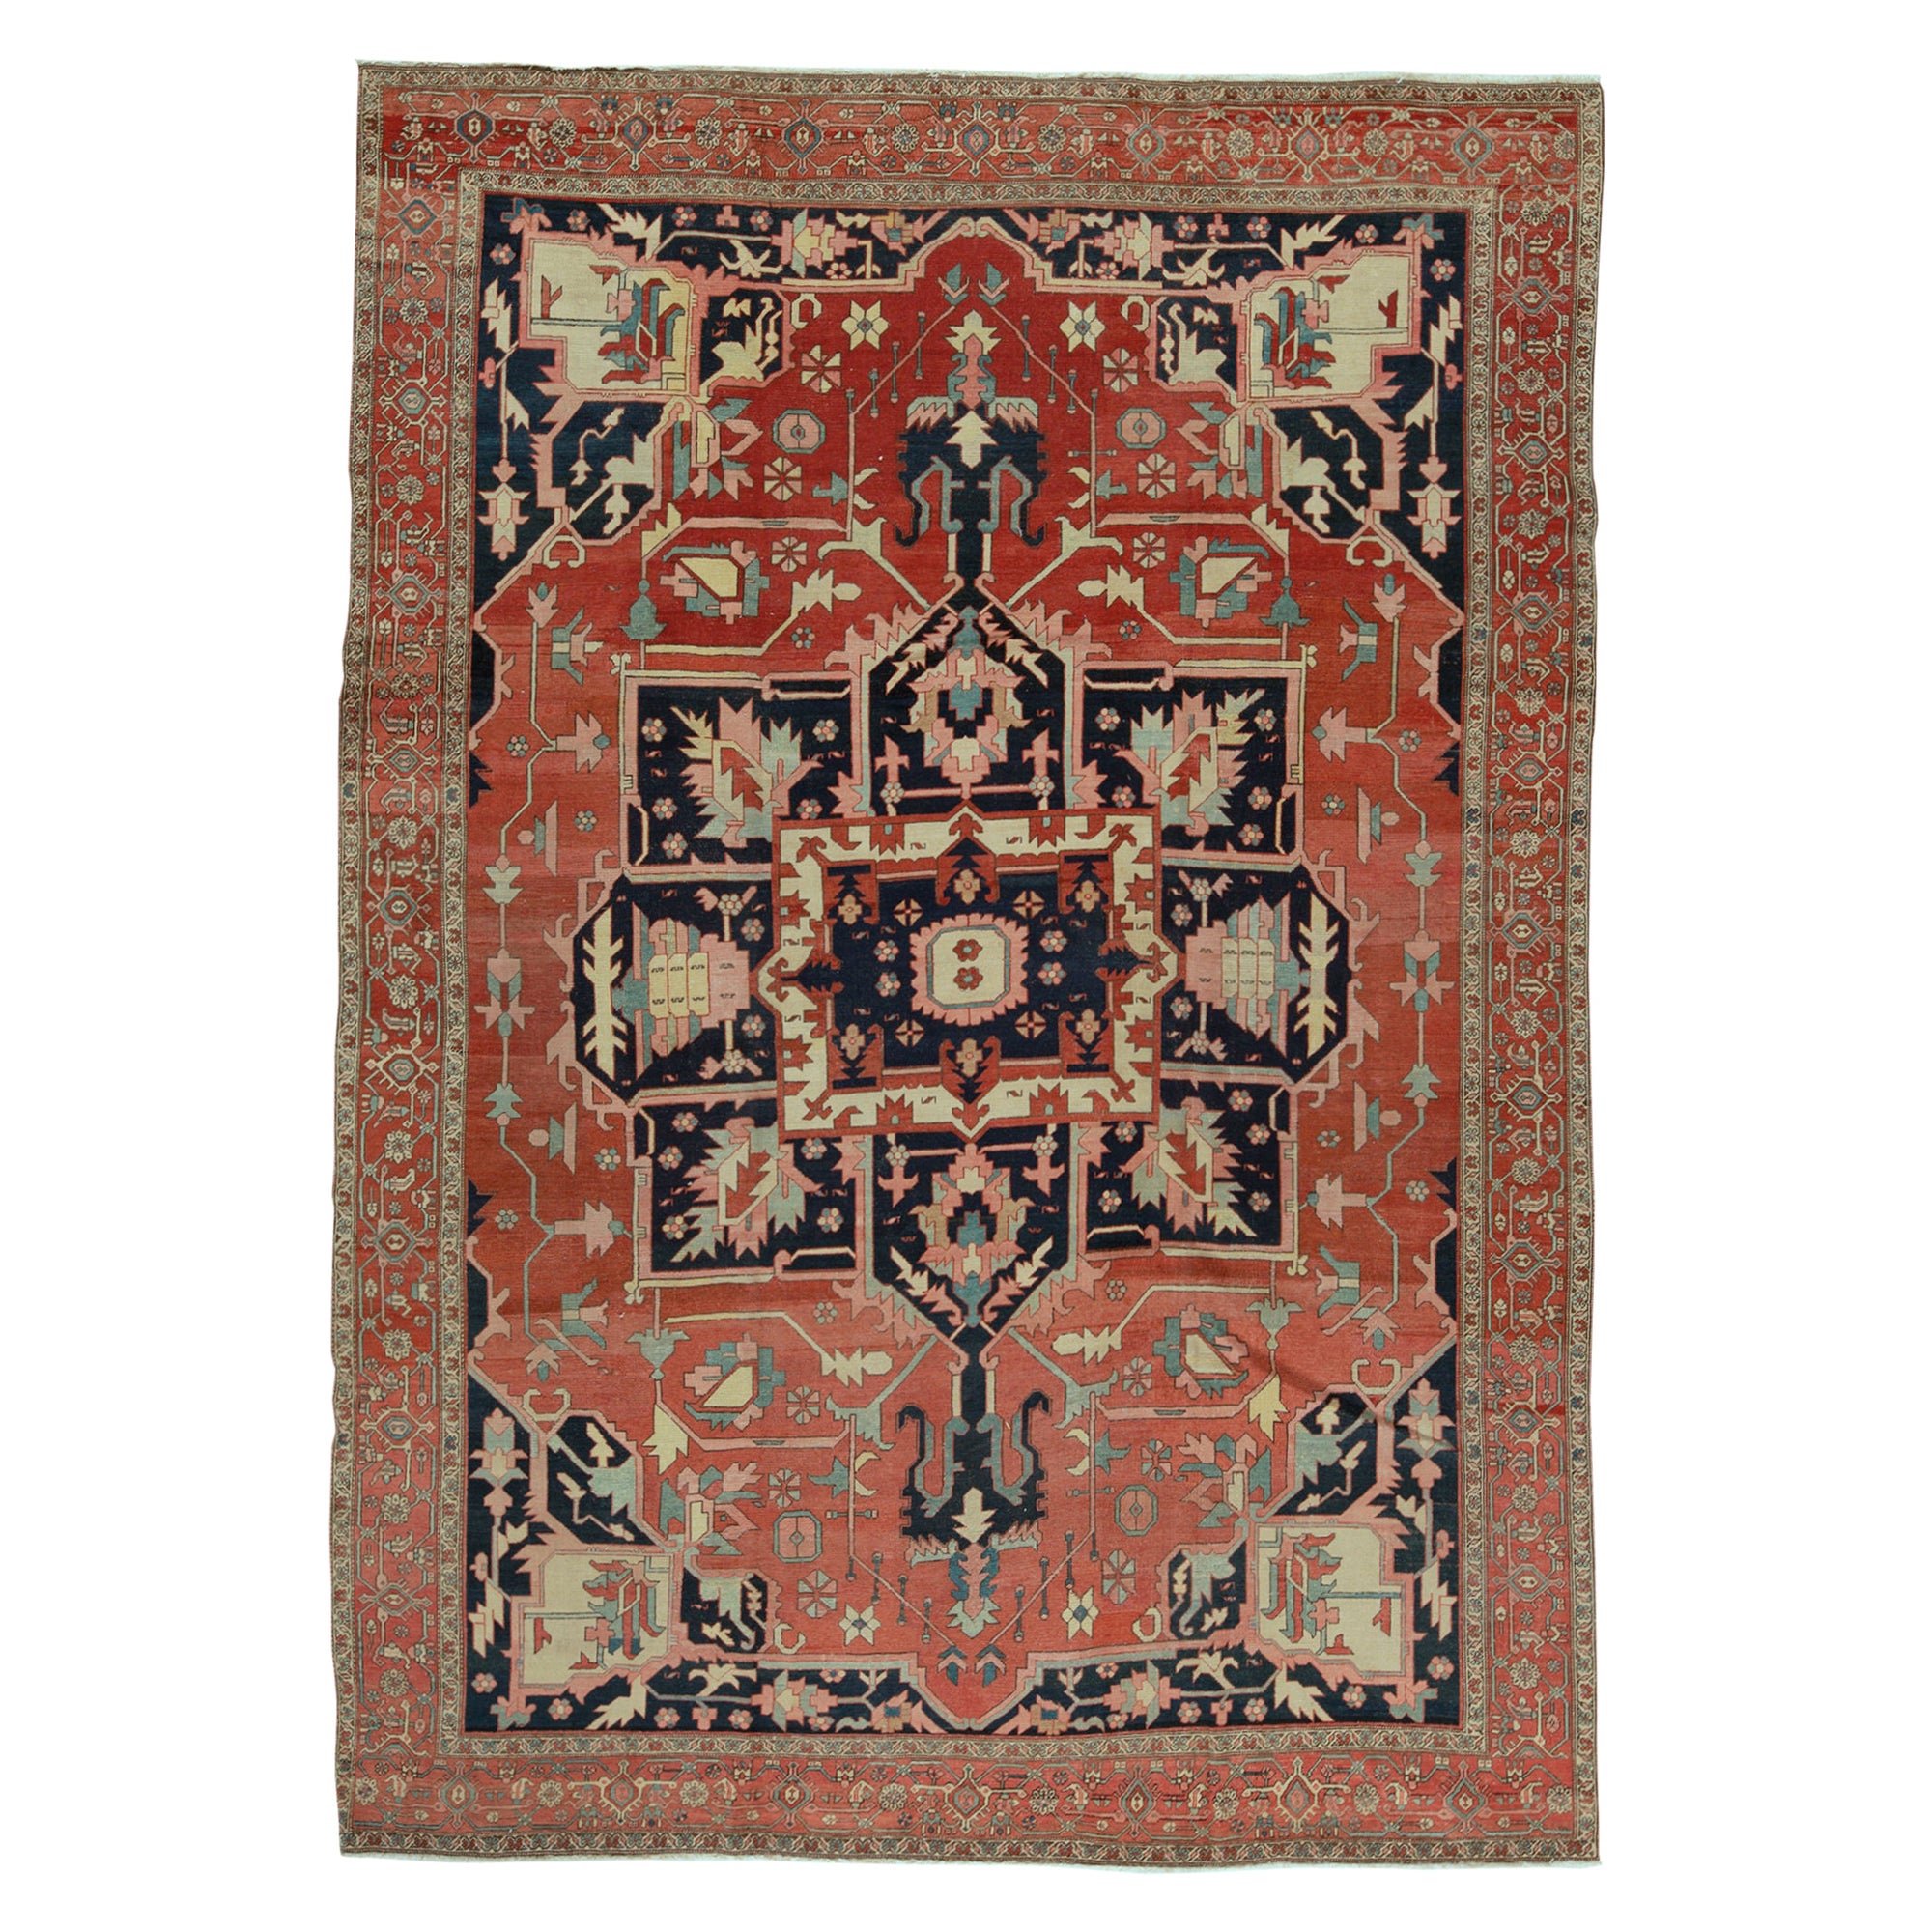   Antique Persian Fine Traditional Handwoven Luxury Wool Red Rug For Sale